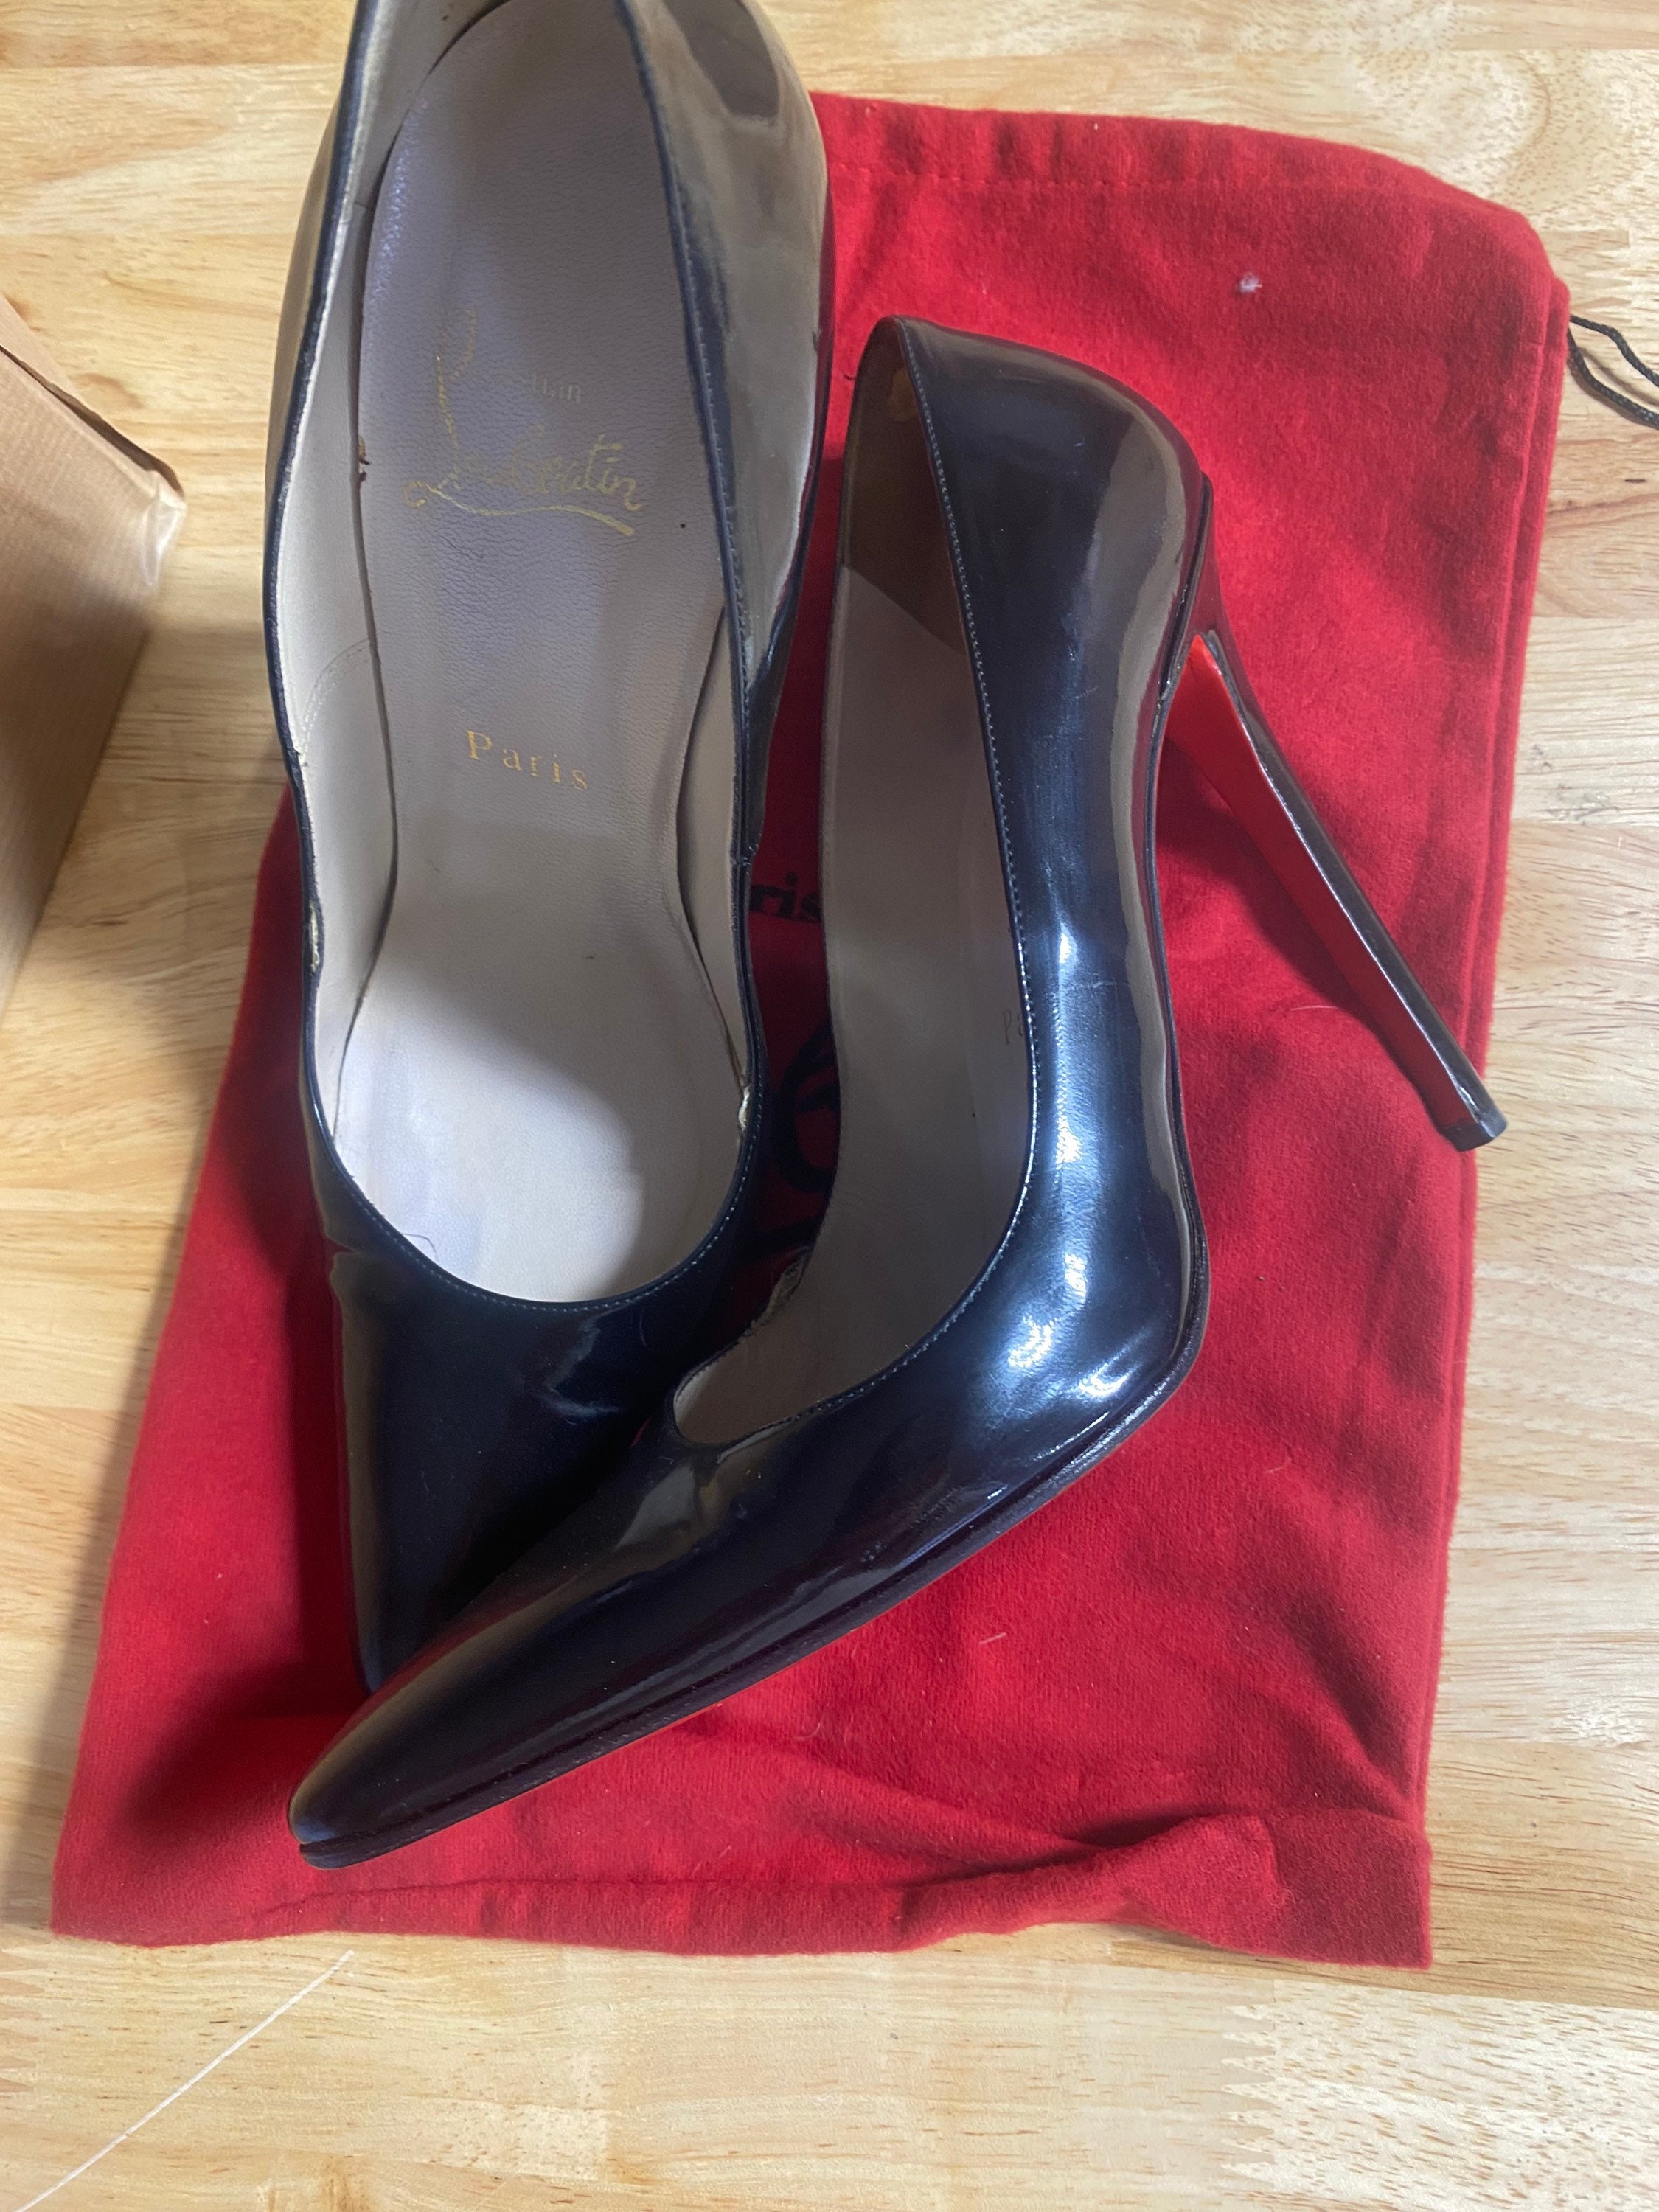 RARE Christian Louboutin Mad Mary Jane 120mm Studded Patent Leather Pumps